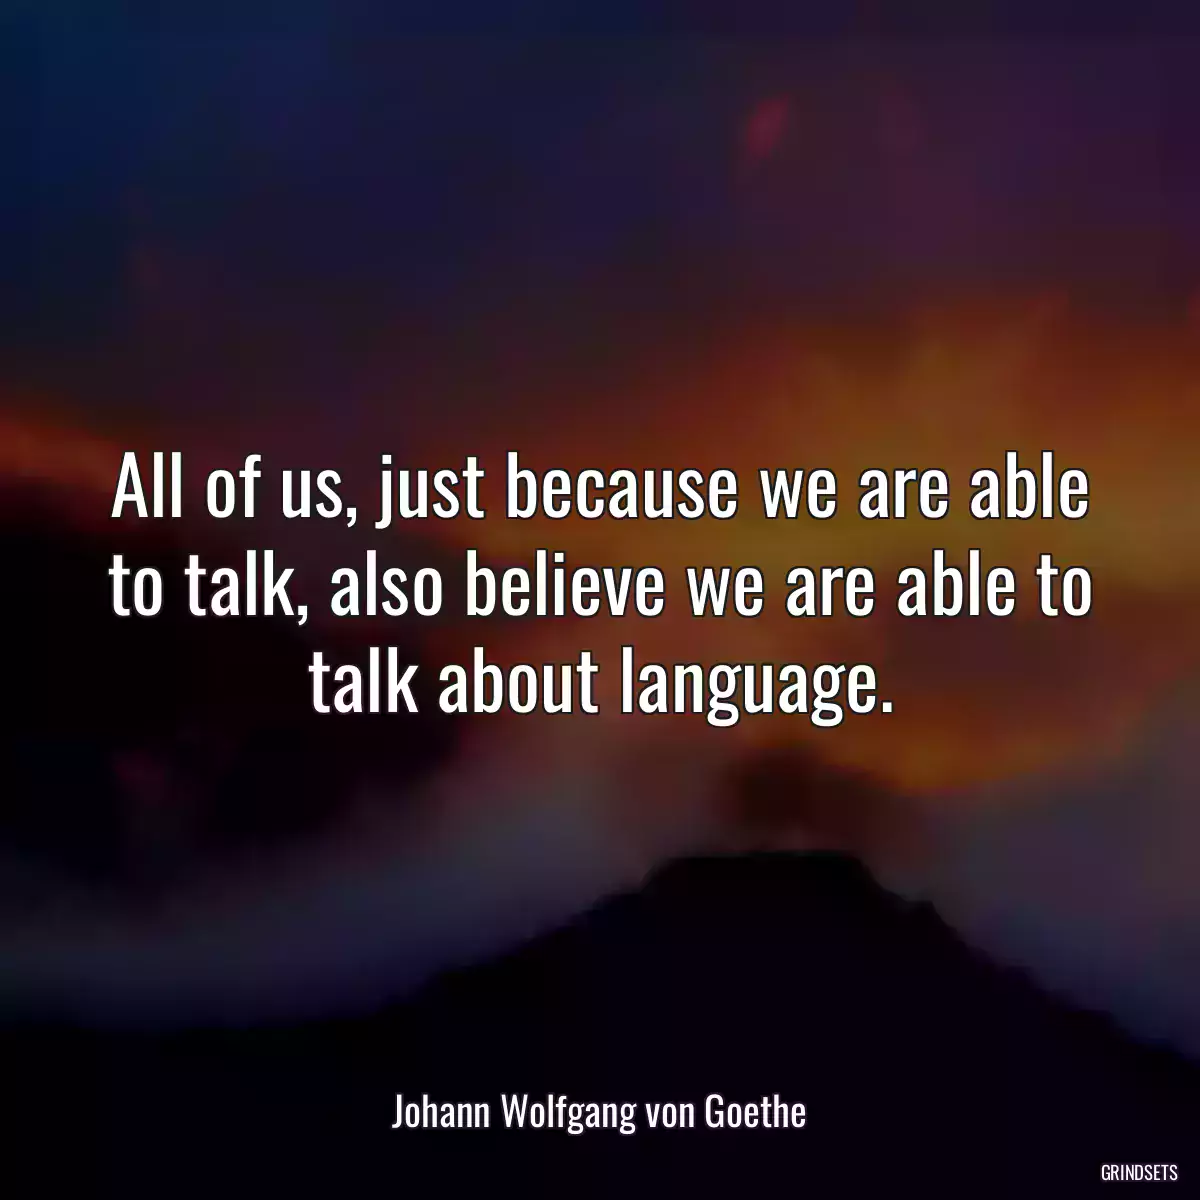 All of us, just because we are able to talk, also believe we are able to talk about language.